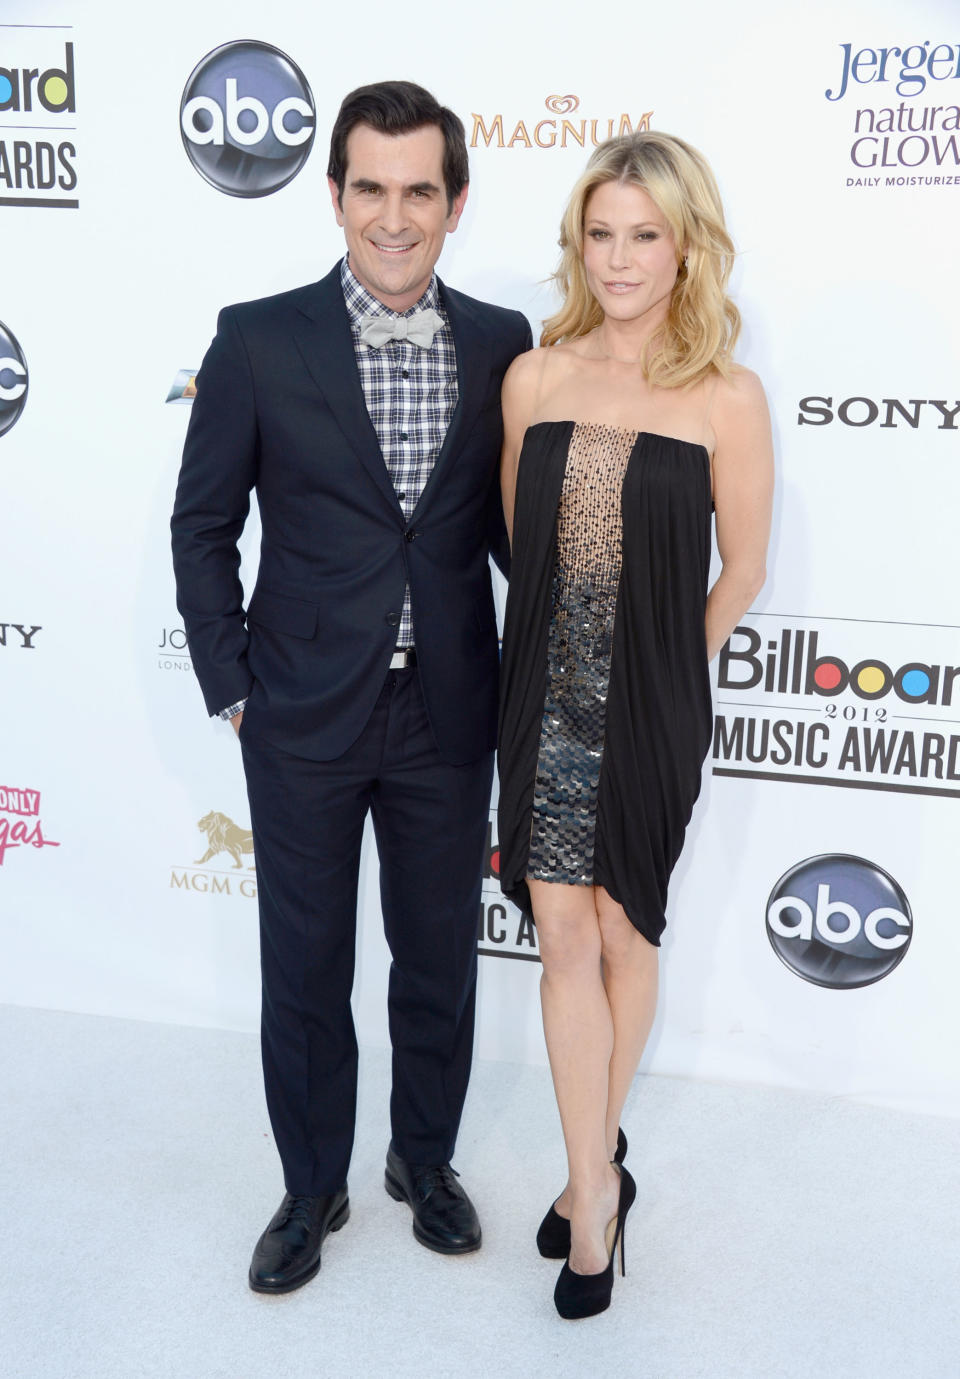 LAS VEGAS, NV - MAY 20: (L-R) Actors Ty Burrell and Julie Bowen arrive at the 2012 Billboard Music Awards held at the MGM Grand Garden Arena on May 20, 2012 in Las Vegas, Nevada. (Photo by Frazer Harrison/Getty Images for ABC)